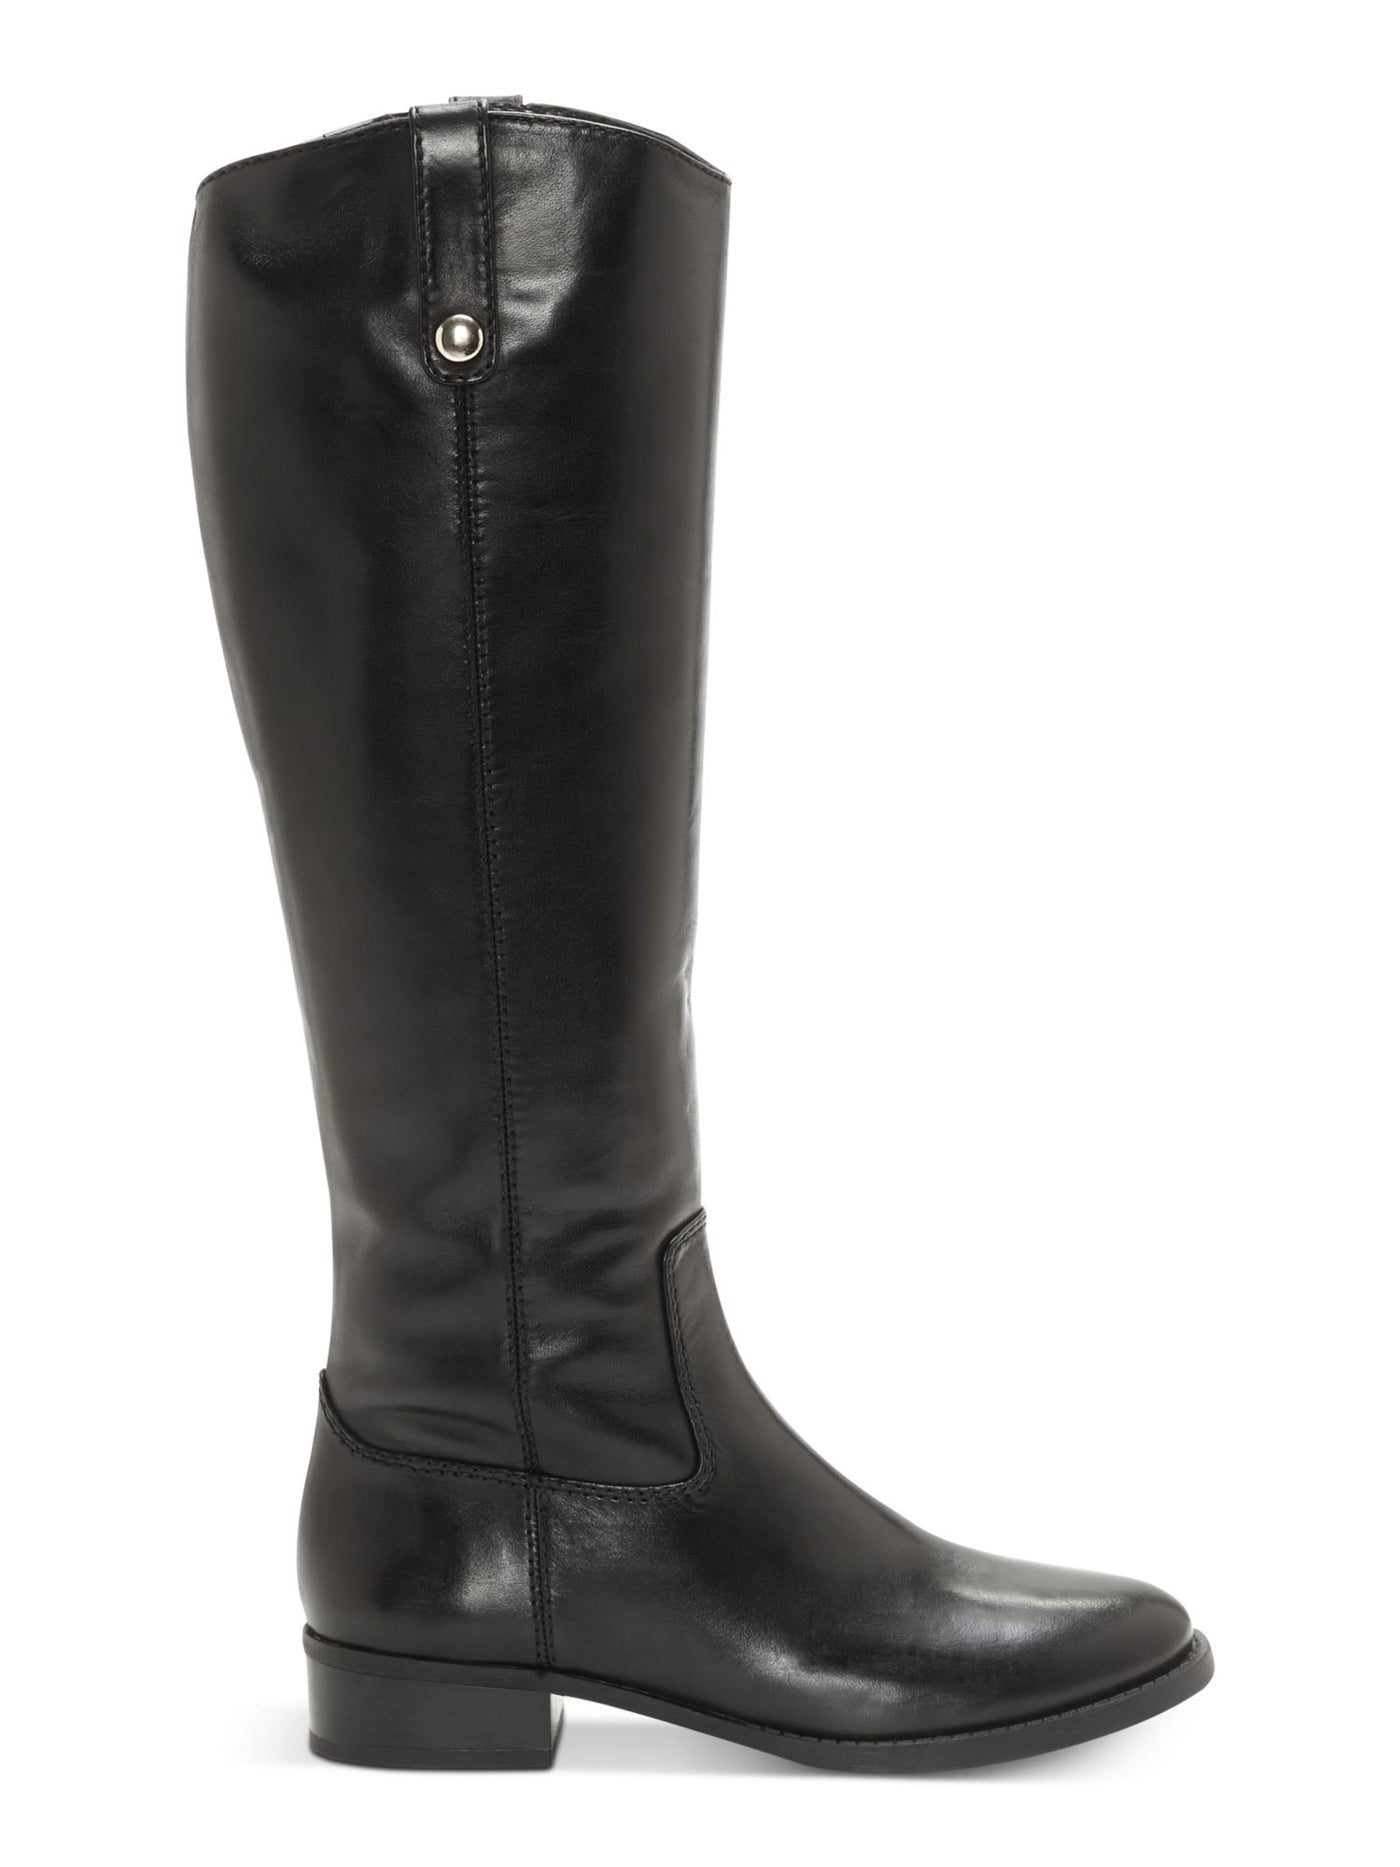 INC Womens Black Fawne Round Toe Stacked Heel Zip-Up Leather Riding Boot 6.5